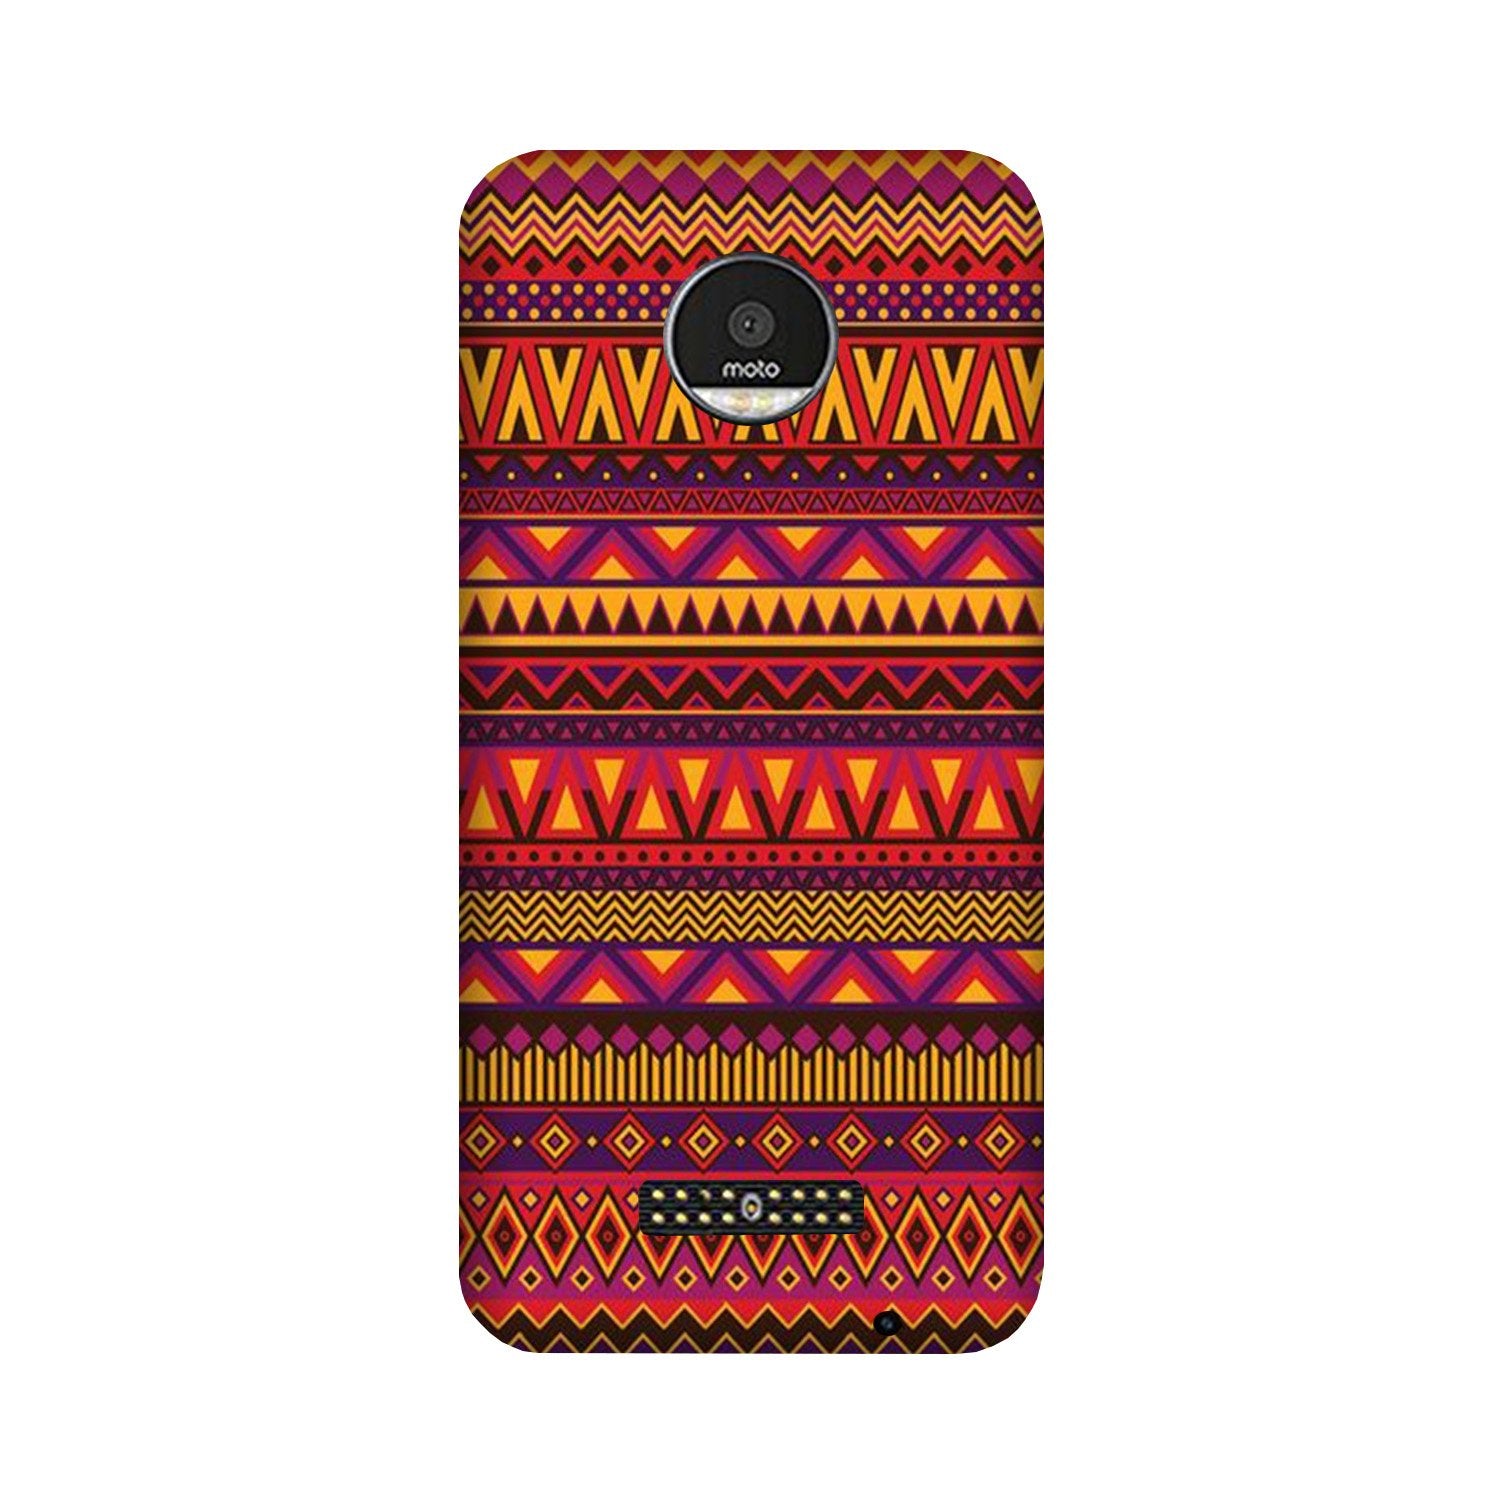 Zigzag line pattern2 Case for Moto Z Play